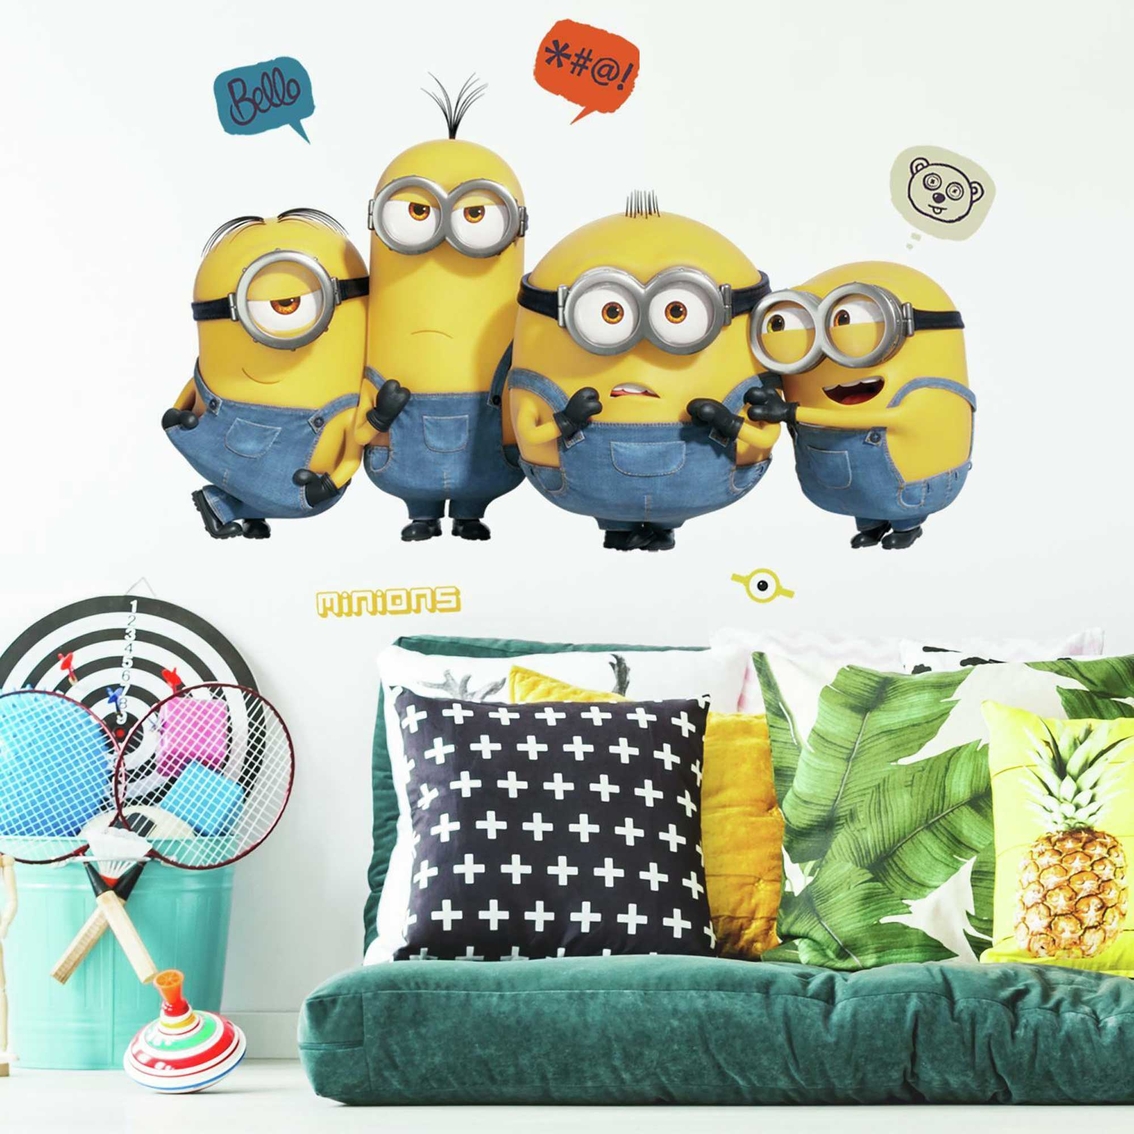 RoomMates Minions 2 Peel & Stick Giant Wall Decals - Image 6 of 7